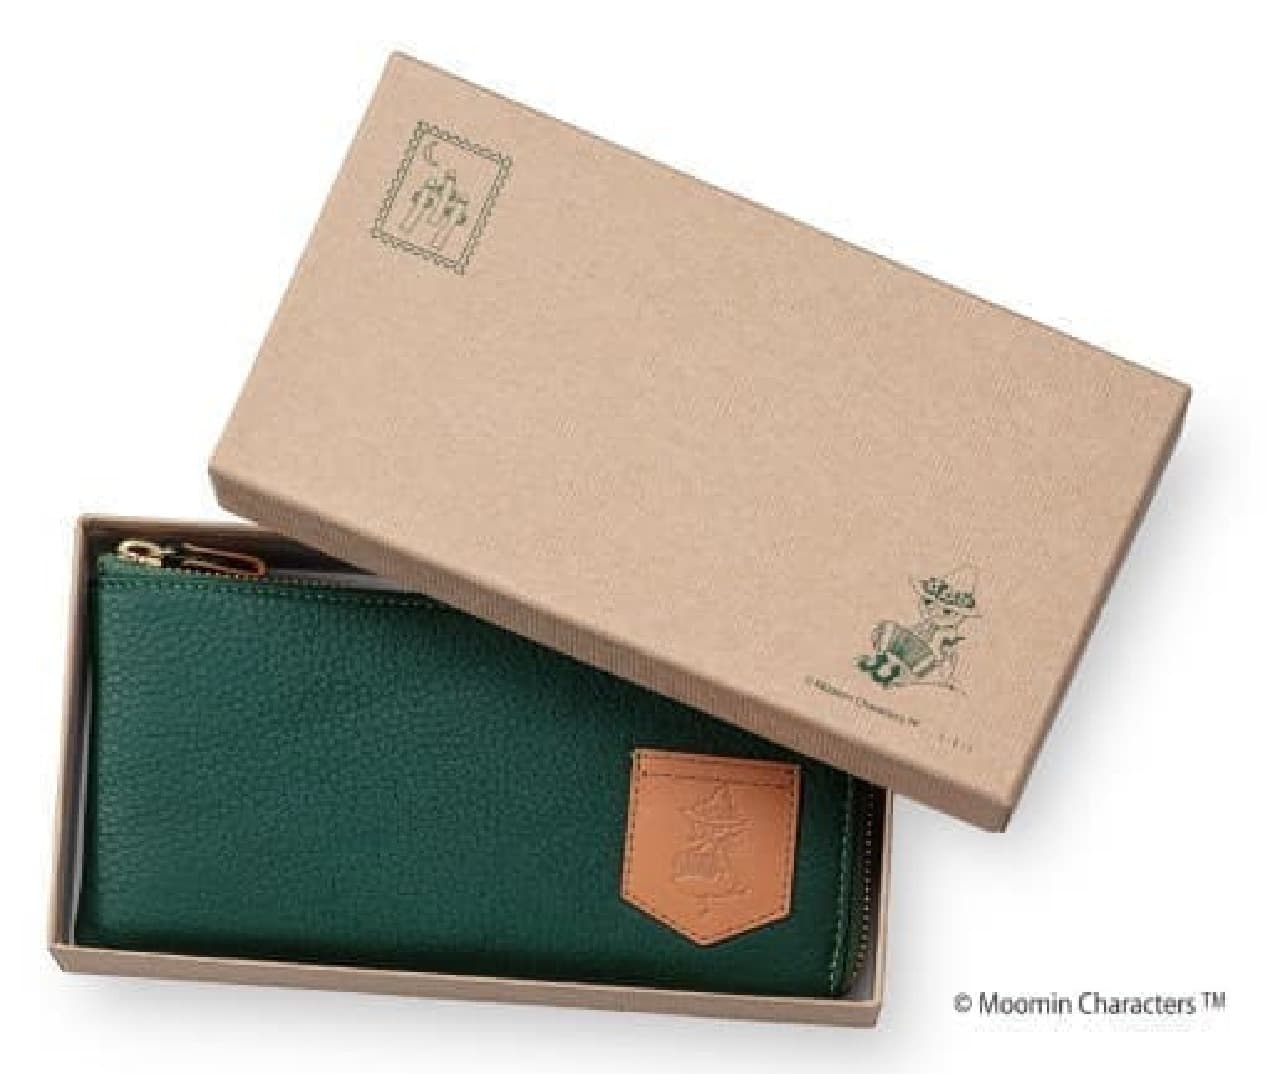 Moomin 75th Anniversary "Snufkin Forest Leather Wallet" Released --A green wallet inspired by the Moominvalley forest